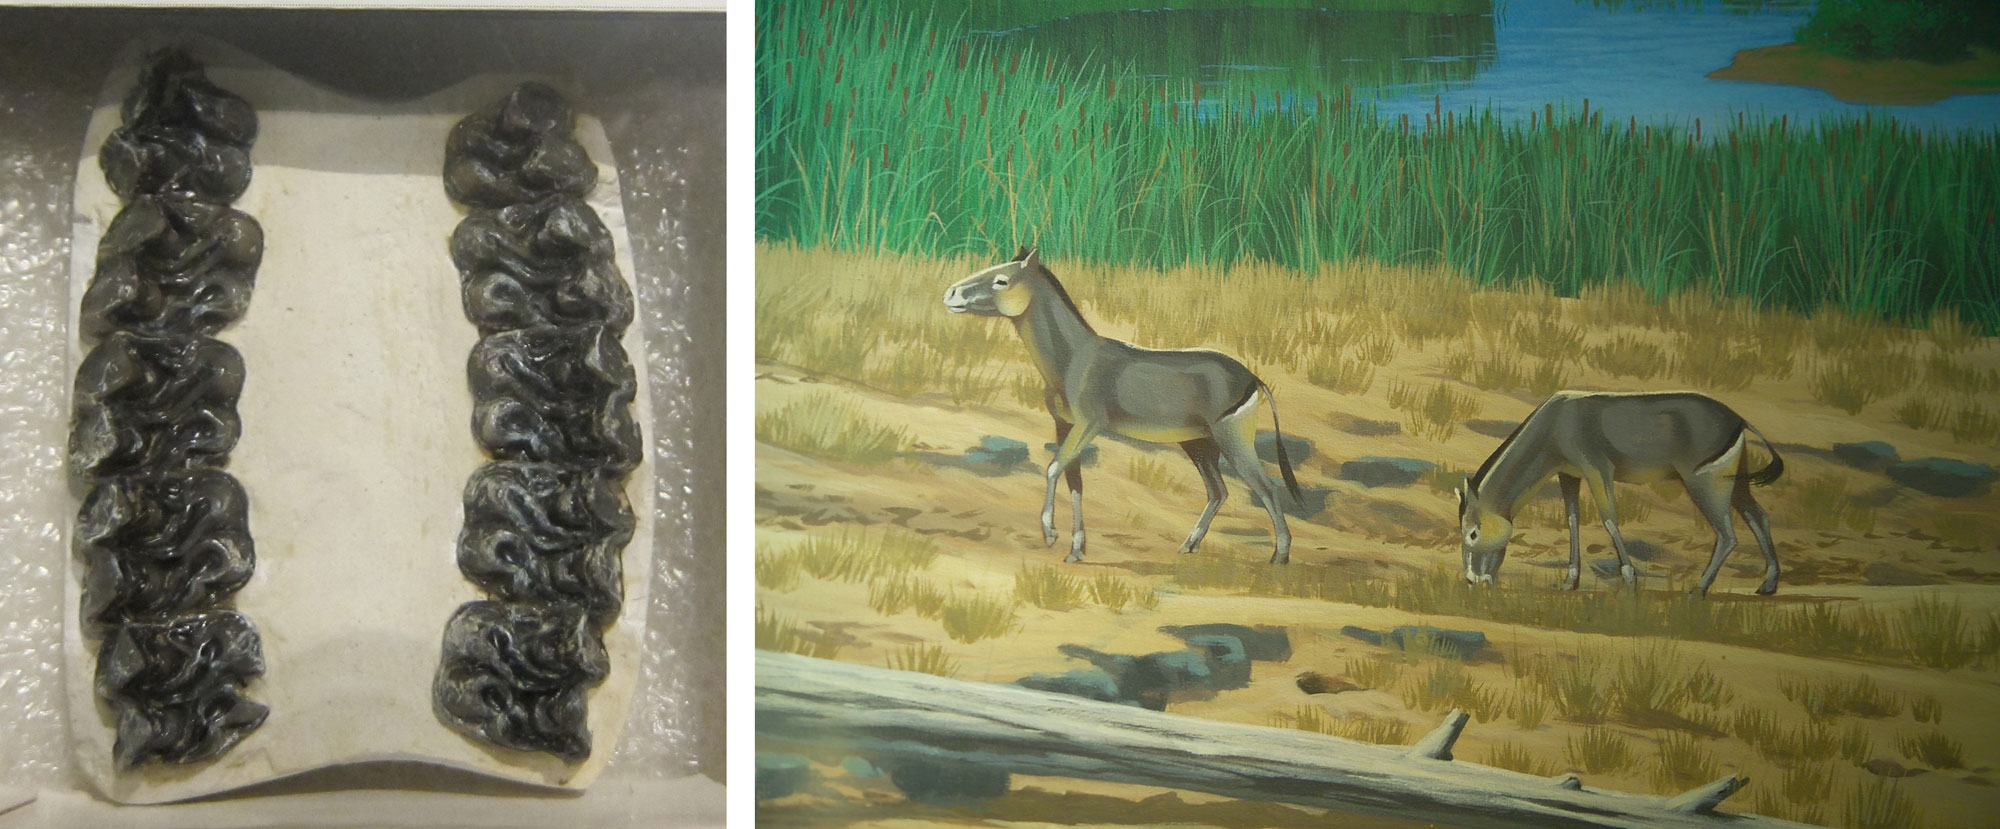 2-panel image of the ancient horse Archaeohippus from the Miocene Mascall Formation. Panel 1: Photograph of 10 teeth in two rows embedded in what appears to be a reconstructed piece of bone. Panel 2: Portion of a mural showing two Archaeohippus as they may have appeared in life. The horses are in a grasses area near a river that is flanked by dense stands of cattails.